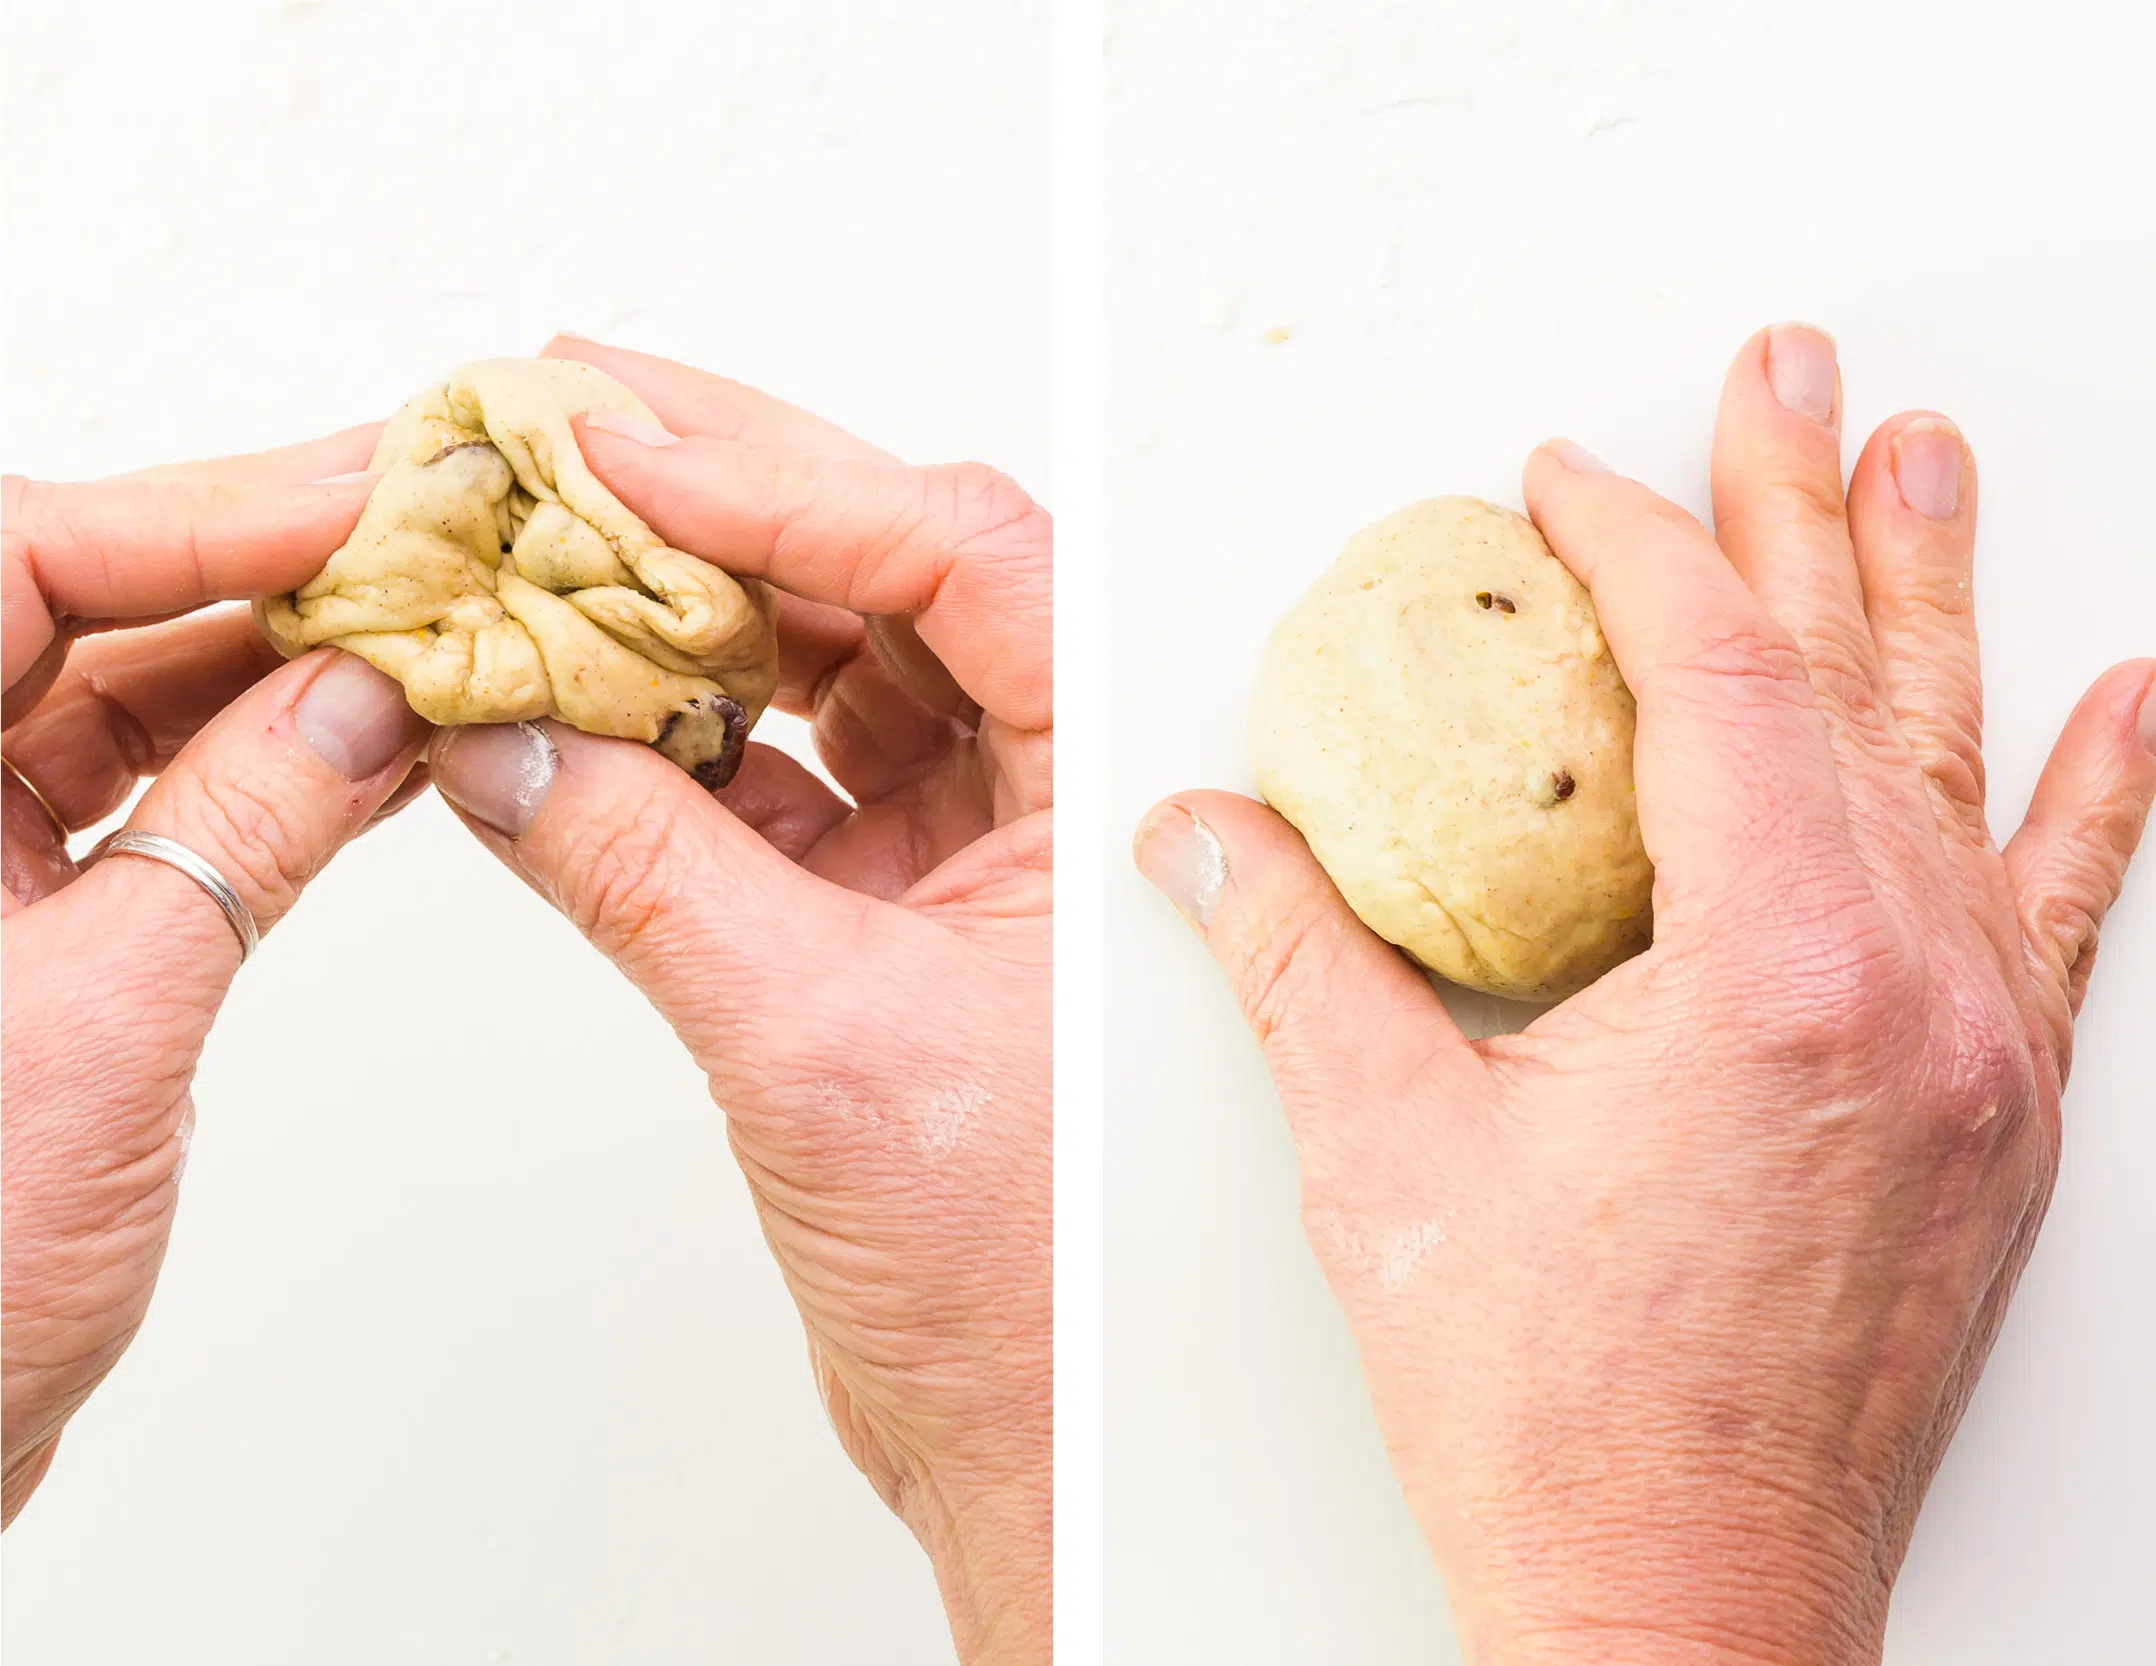 A collage of two images shows hands pressing the dough together on the left and a hand rolling the dough into a ball on the right.